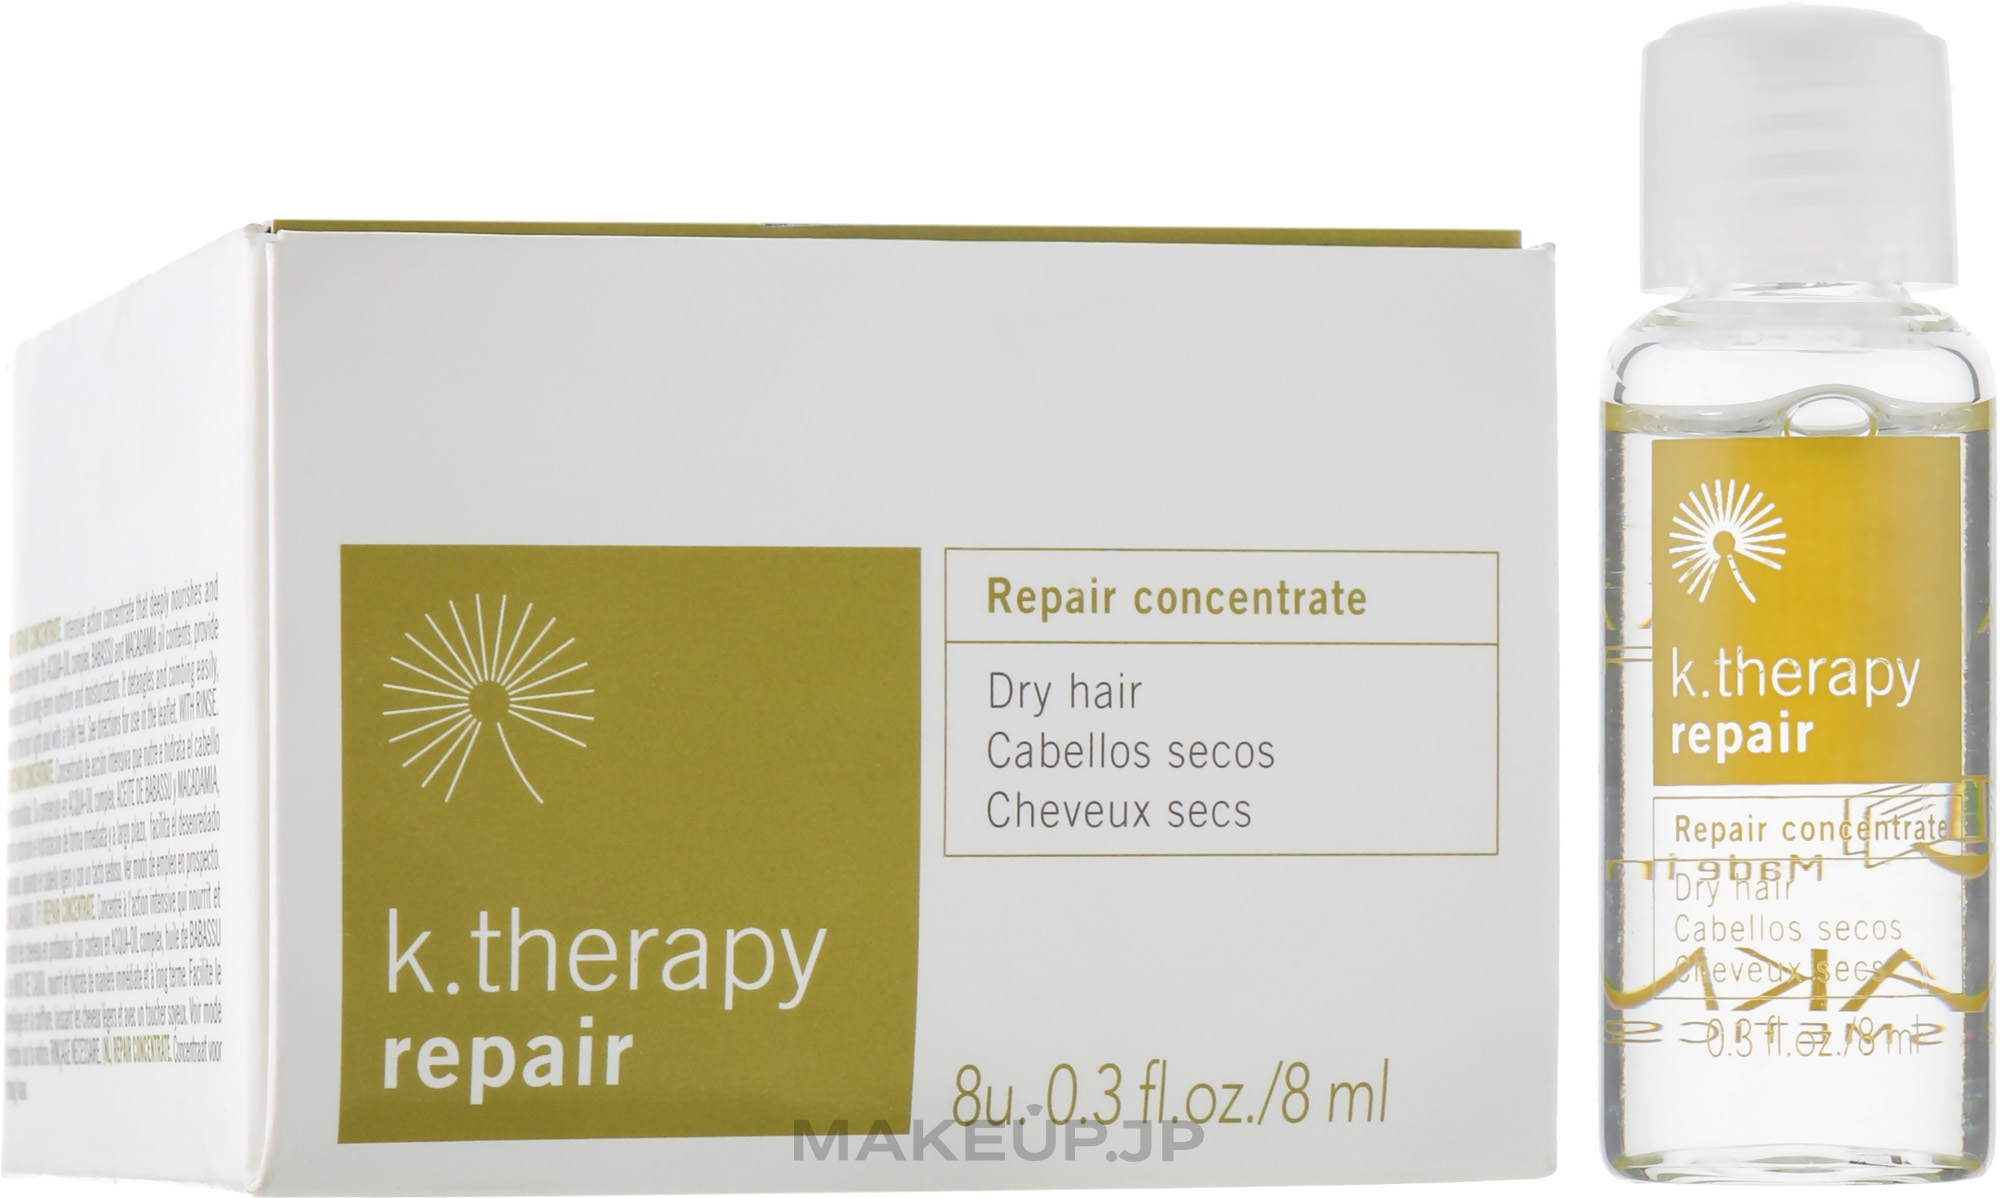 Repairing Concentrate - Lakme K.Therapy Repair Concentrate — photo 8 x 8 ml